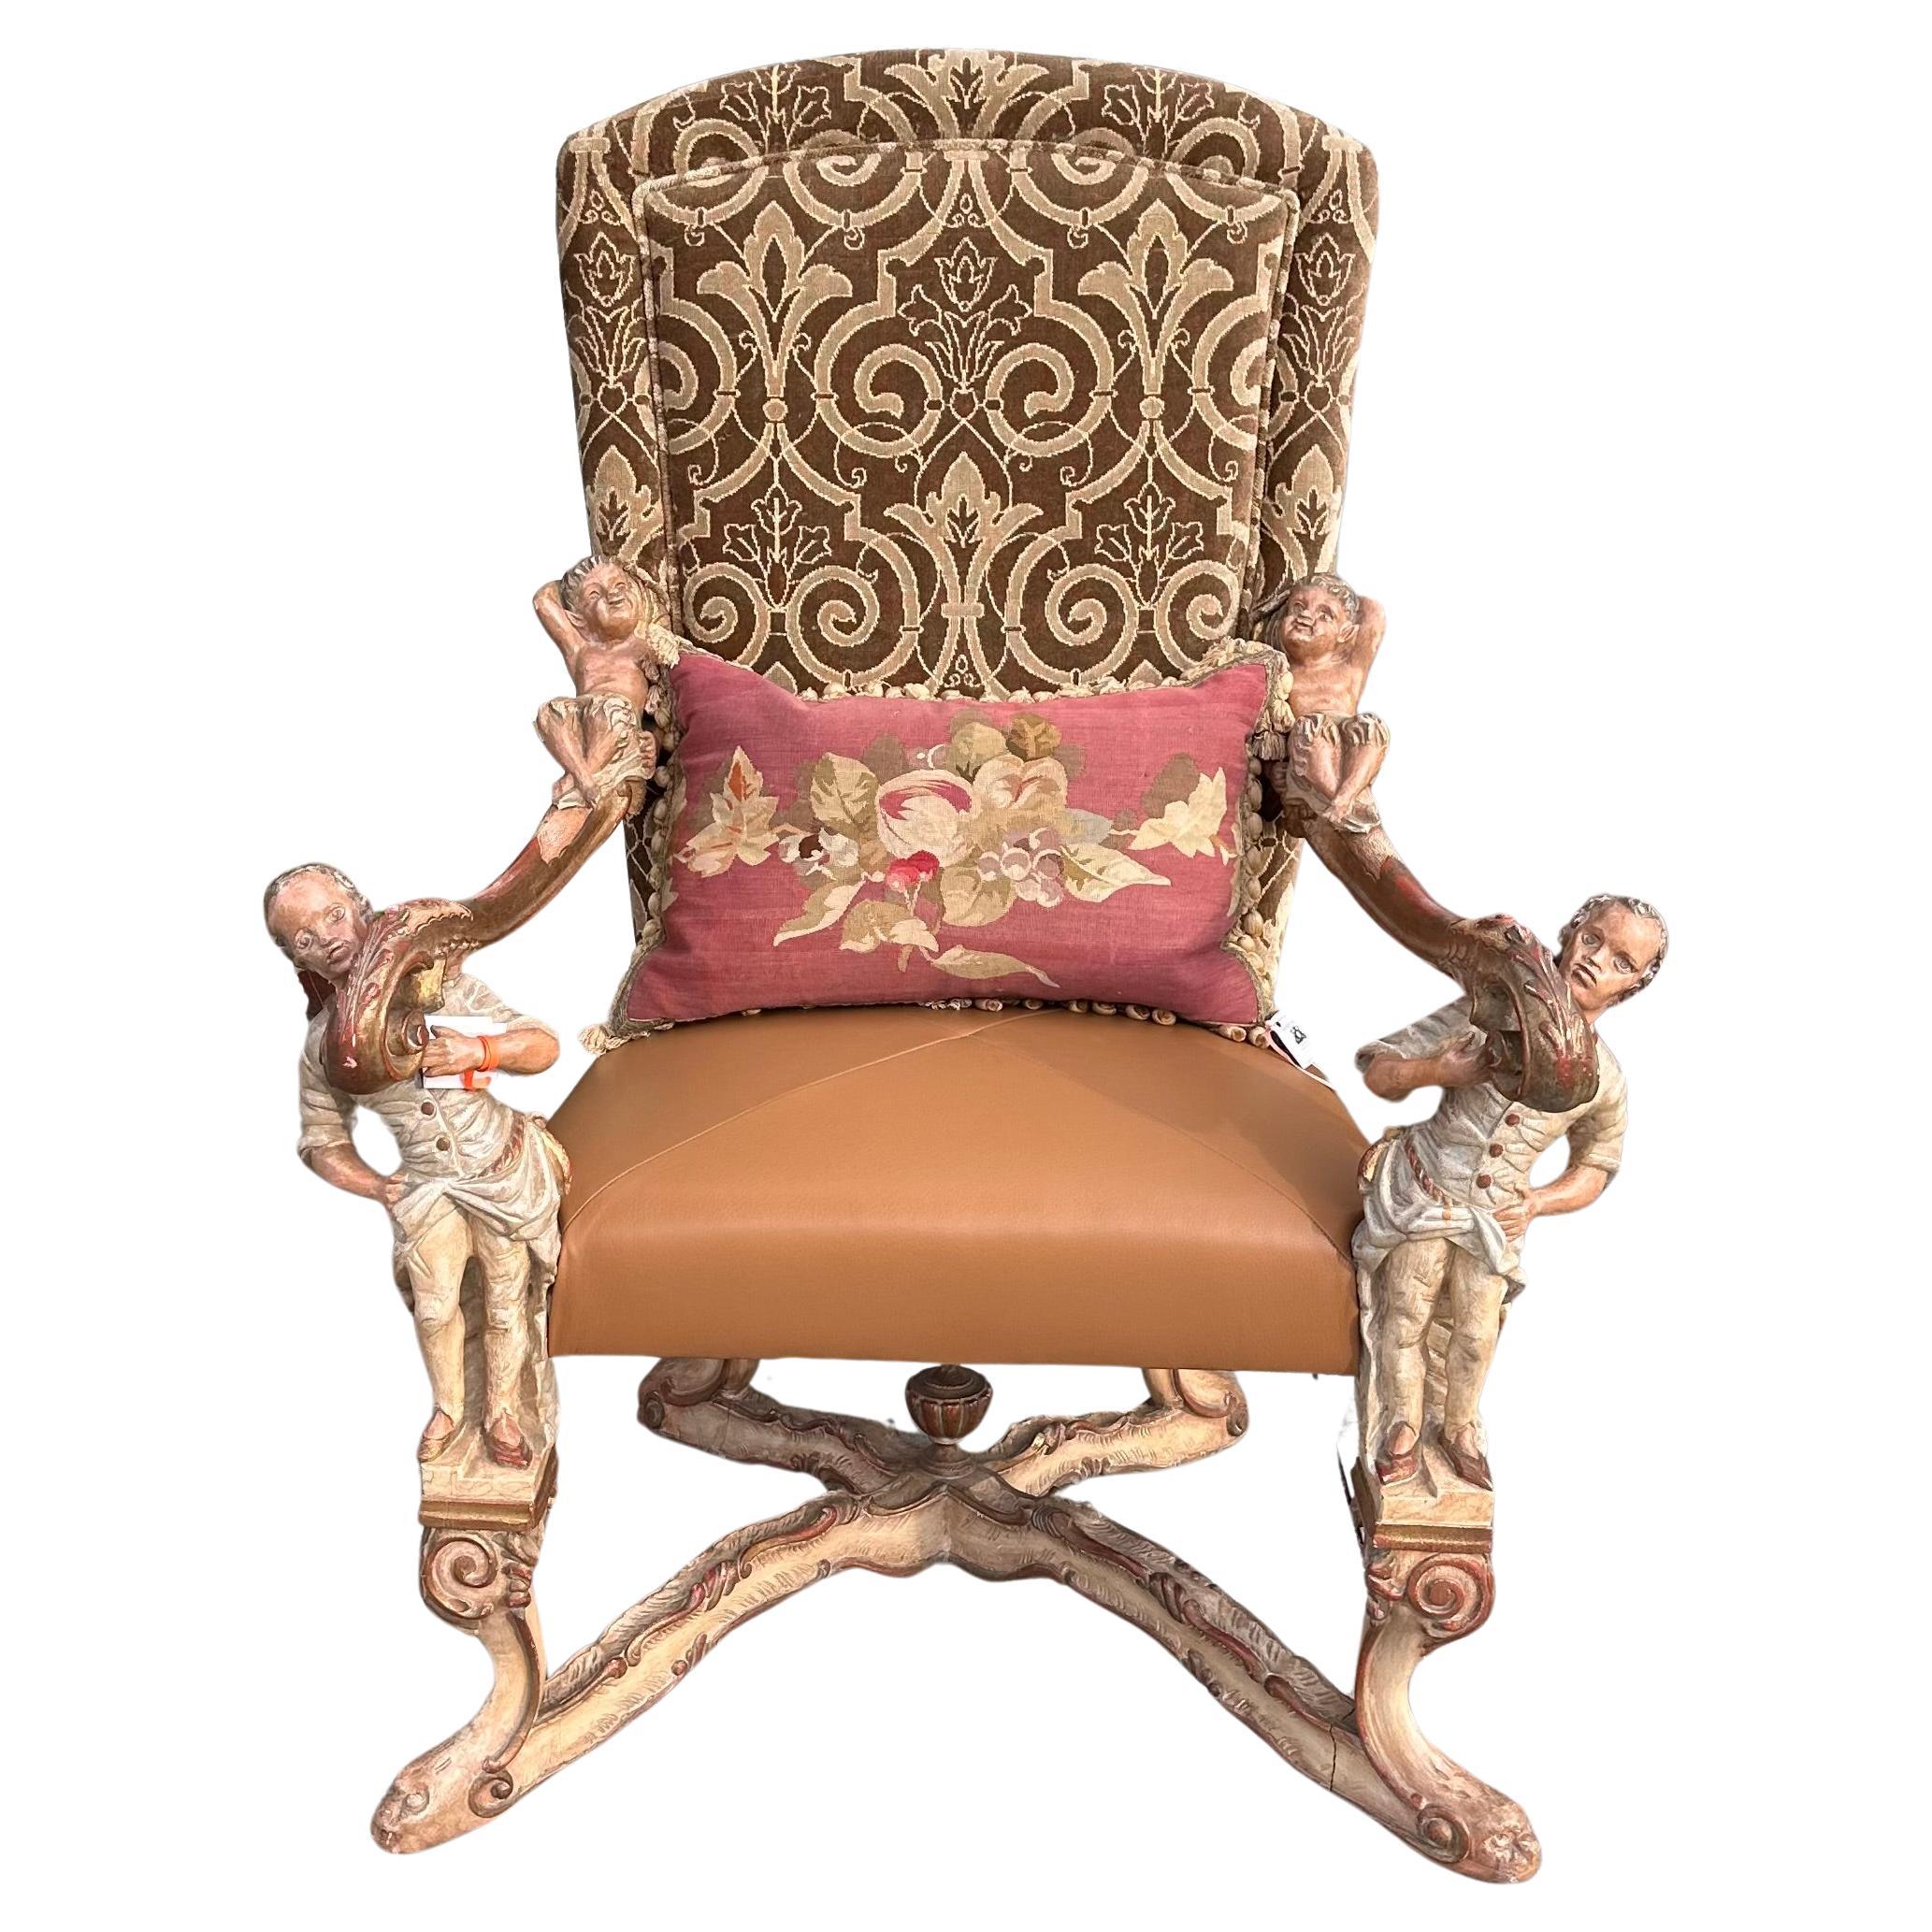 Antique 19th C Venetian Baroque Carved Arm Throne Chair After Andrea Brustolon For Sale